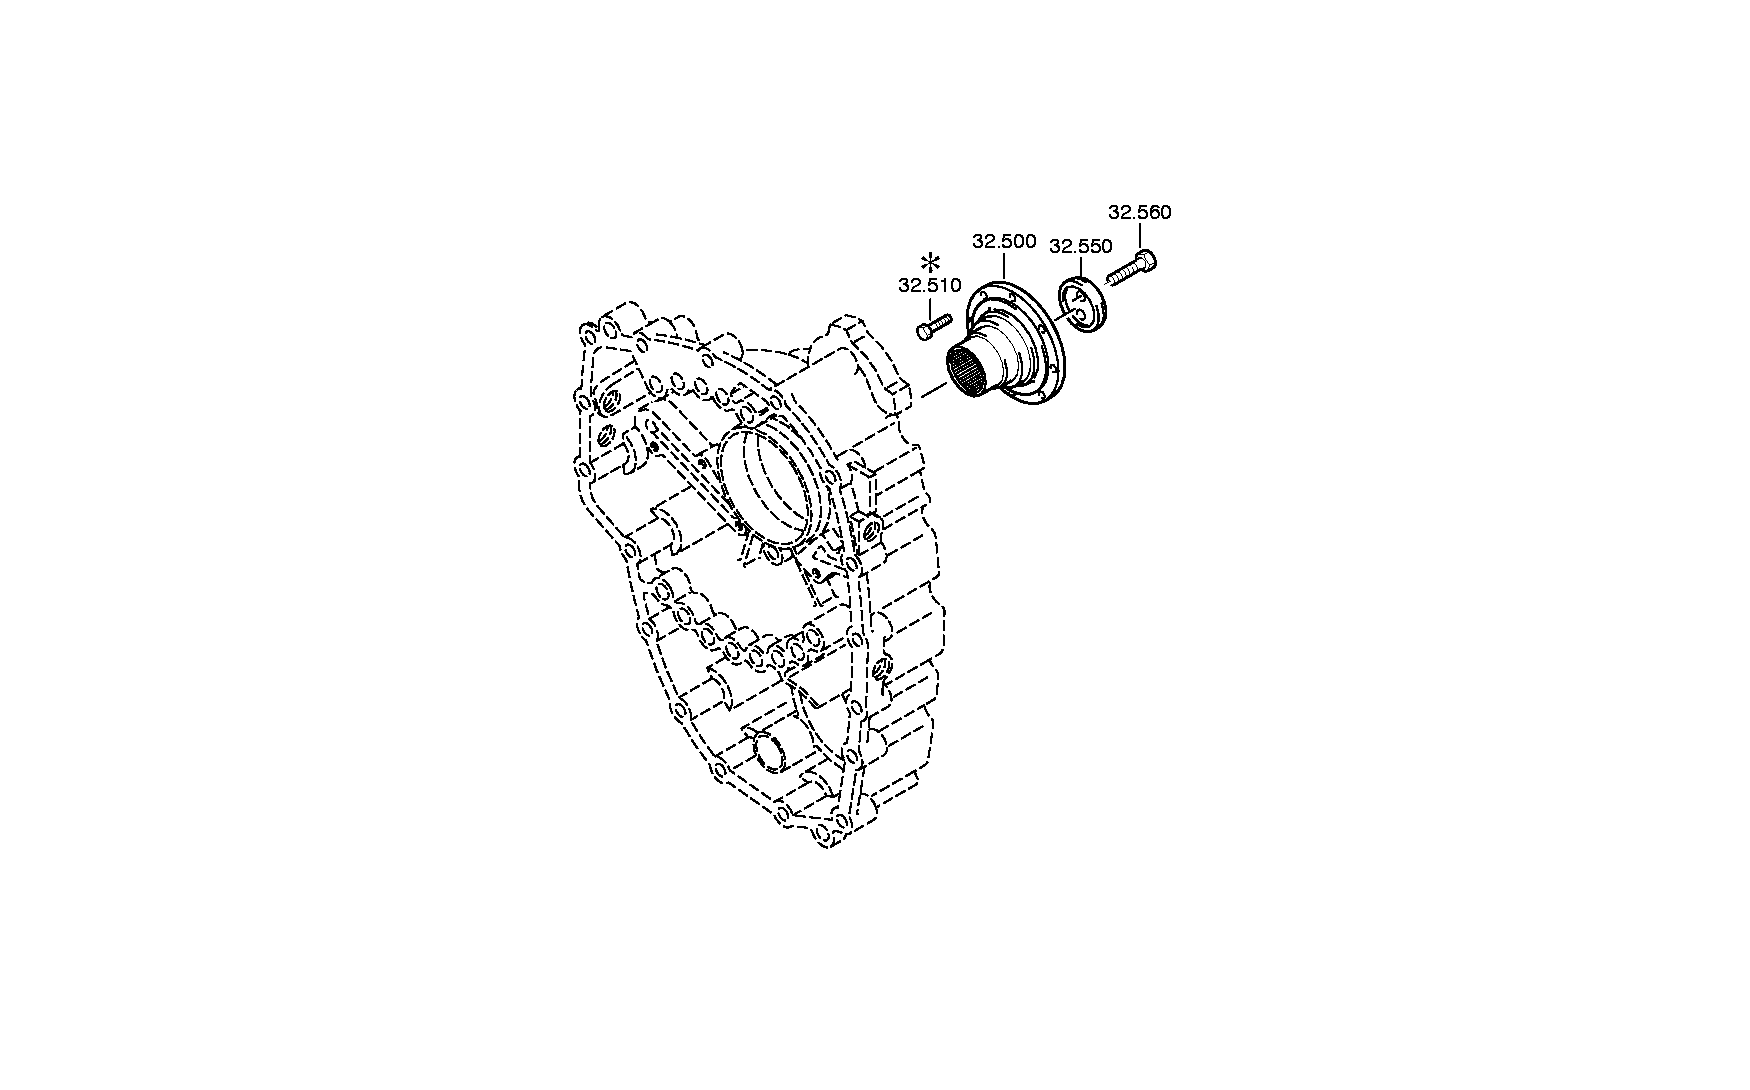 drawing for ASIA MOTORS CO. INC. 409-01-0365 - PLANET CARRIER (figure 2)